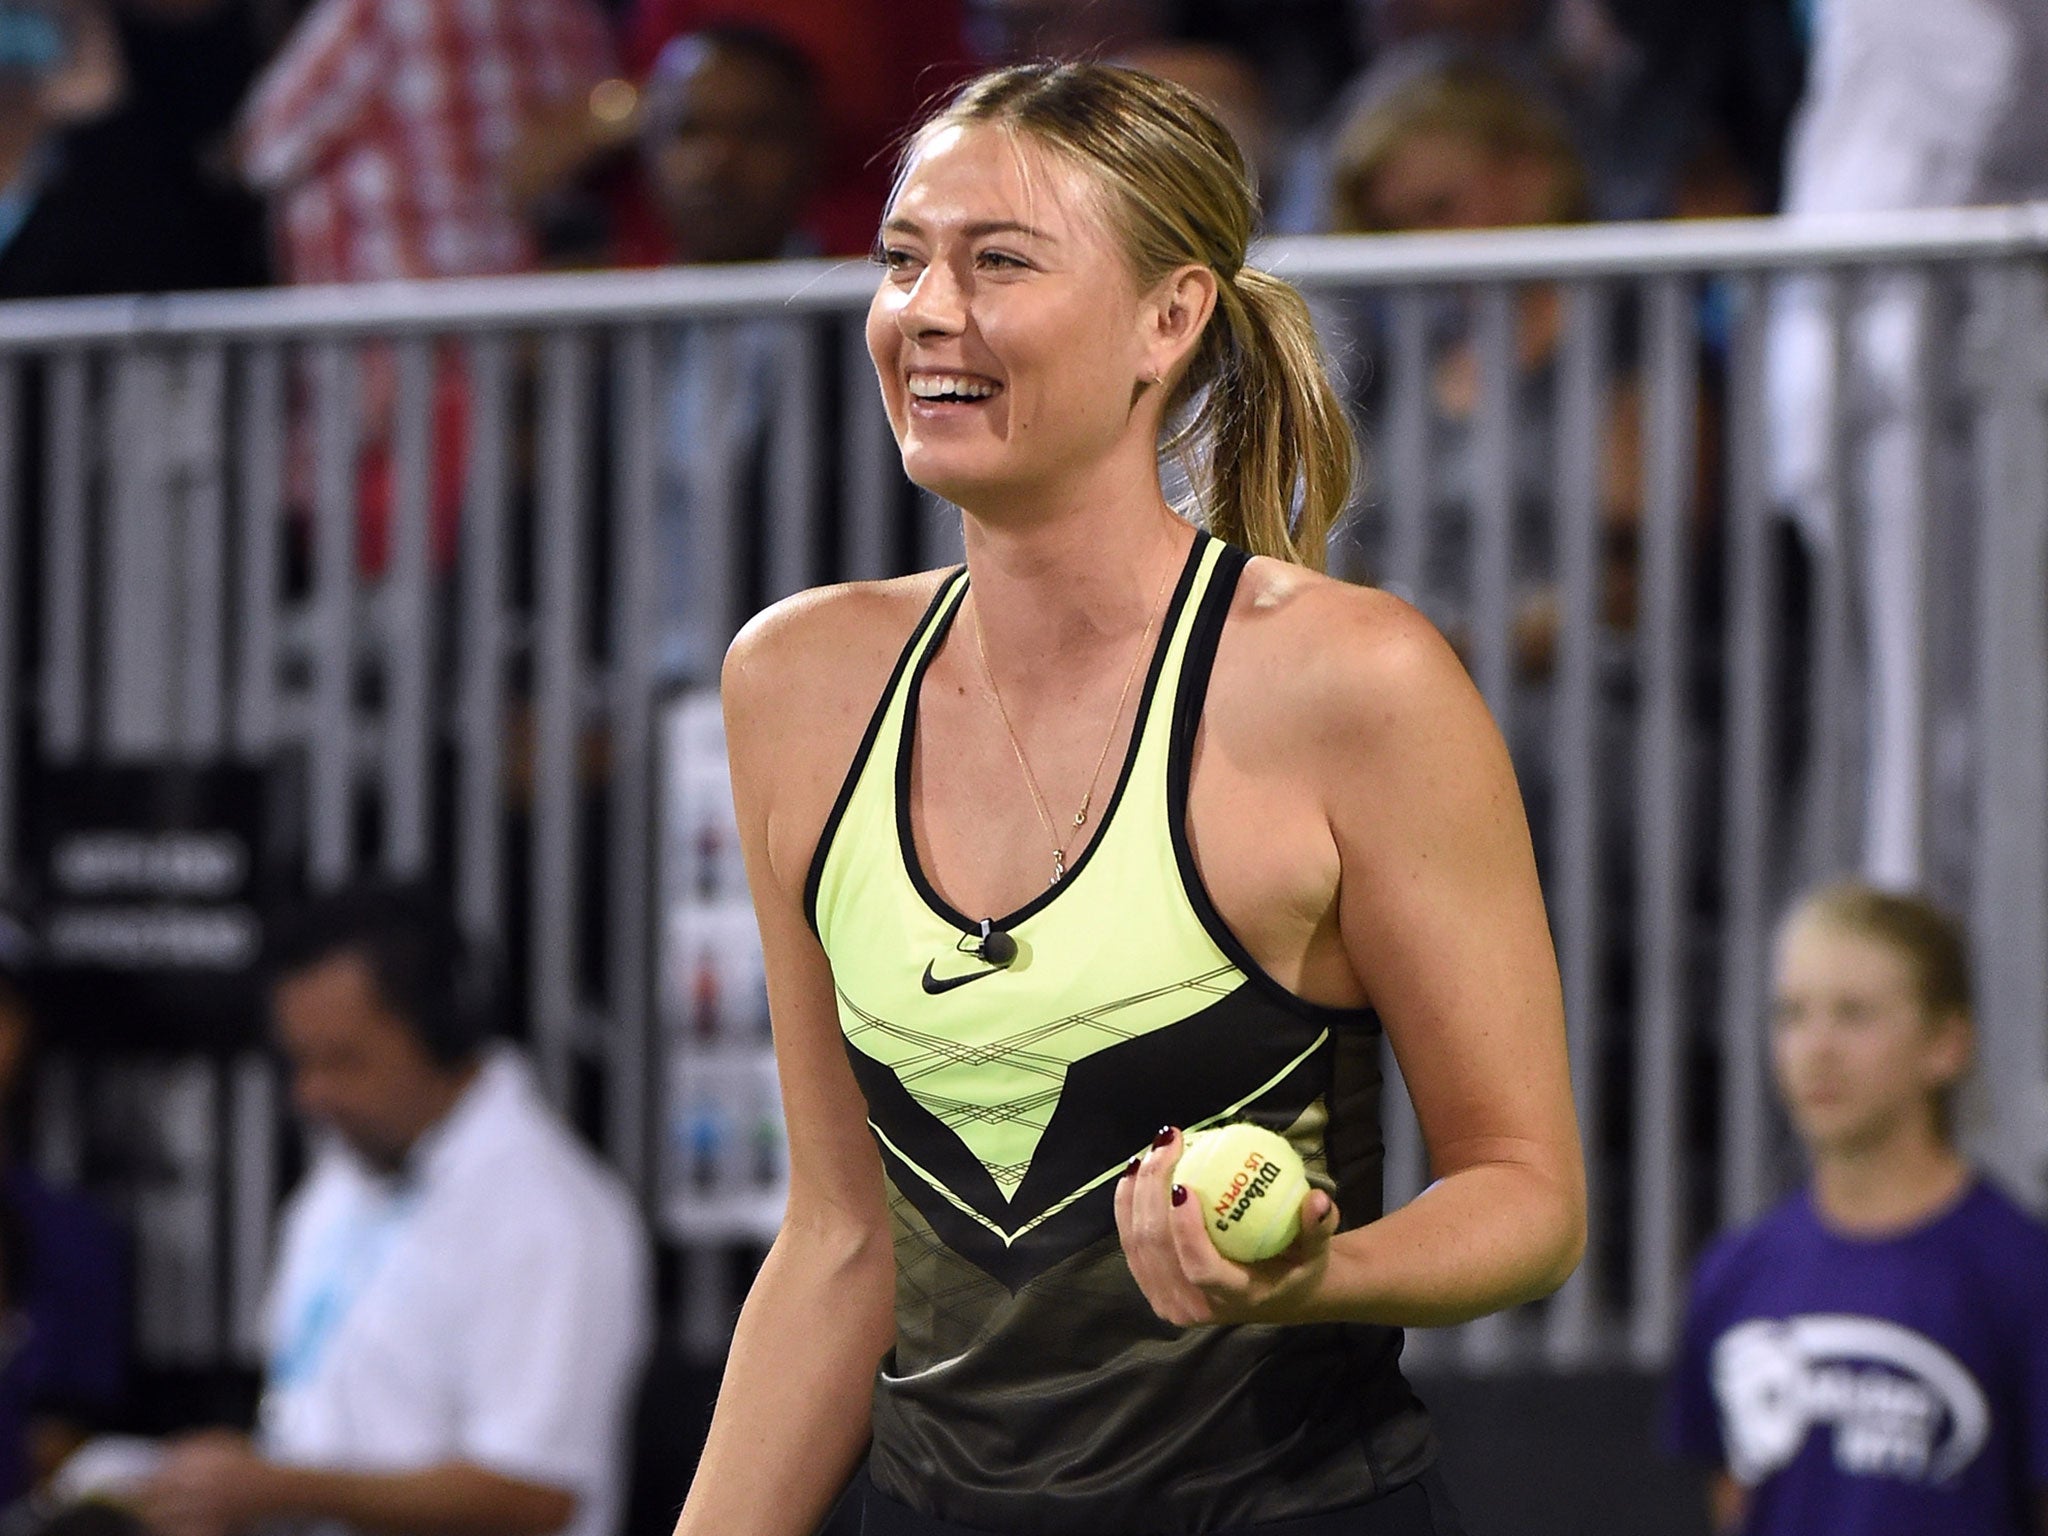 Maria Sharapova announces return from drug ban at Porsche Grand Prix even though it starts two days before expiry The Independent The Independent pic